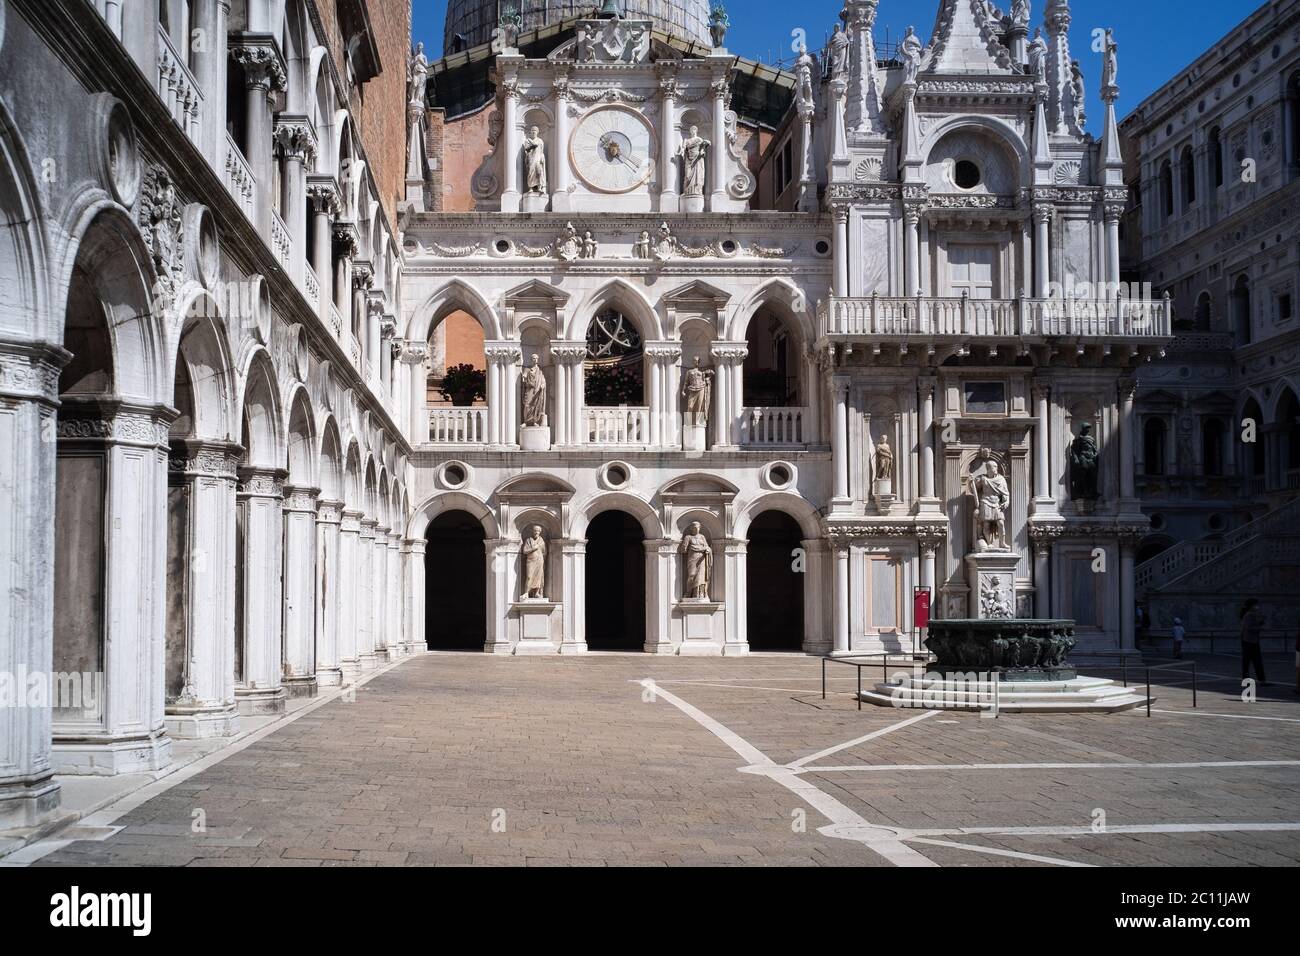 VENICE, ITALY - JUNE 13, 2020: Tourists visit the Ducale Palace Museum the day of the reopening after more than 3 months of closure due to the lockdown for Covid-19 on June 13, 2020 in Venice, Italy. Credit: Awakening/Alamy Live News Stock Photo